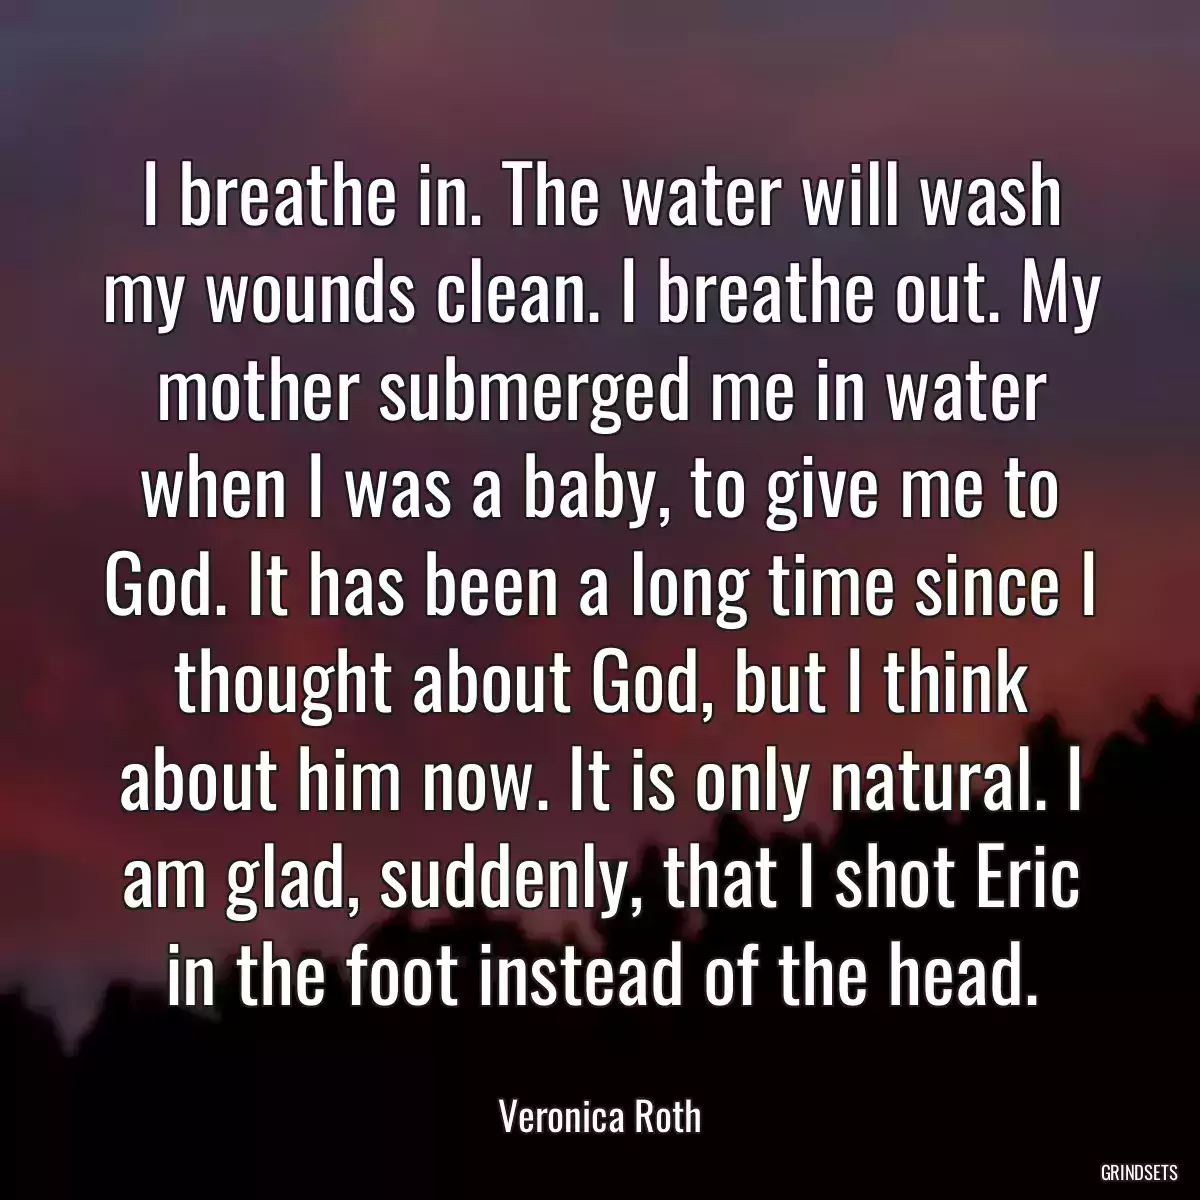 I breathe in. The water will wash my wounds clean. I breathe out. My mother submerged me in water when I was a baby, to give me to God. It has been a long time since I thought about God, but I think about him now. It is only natural. I am glad, suddenly, that I shot Eric in the foot instead of the head.